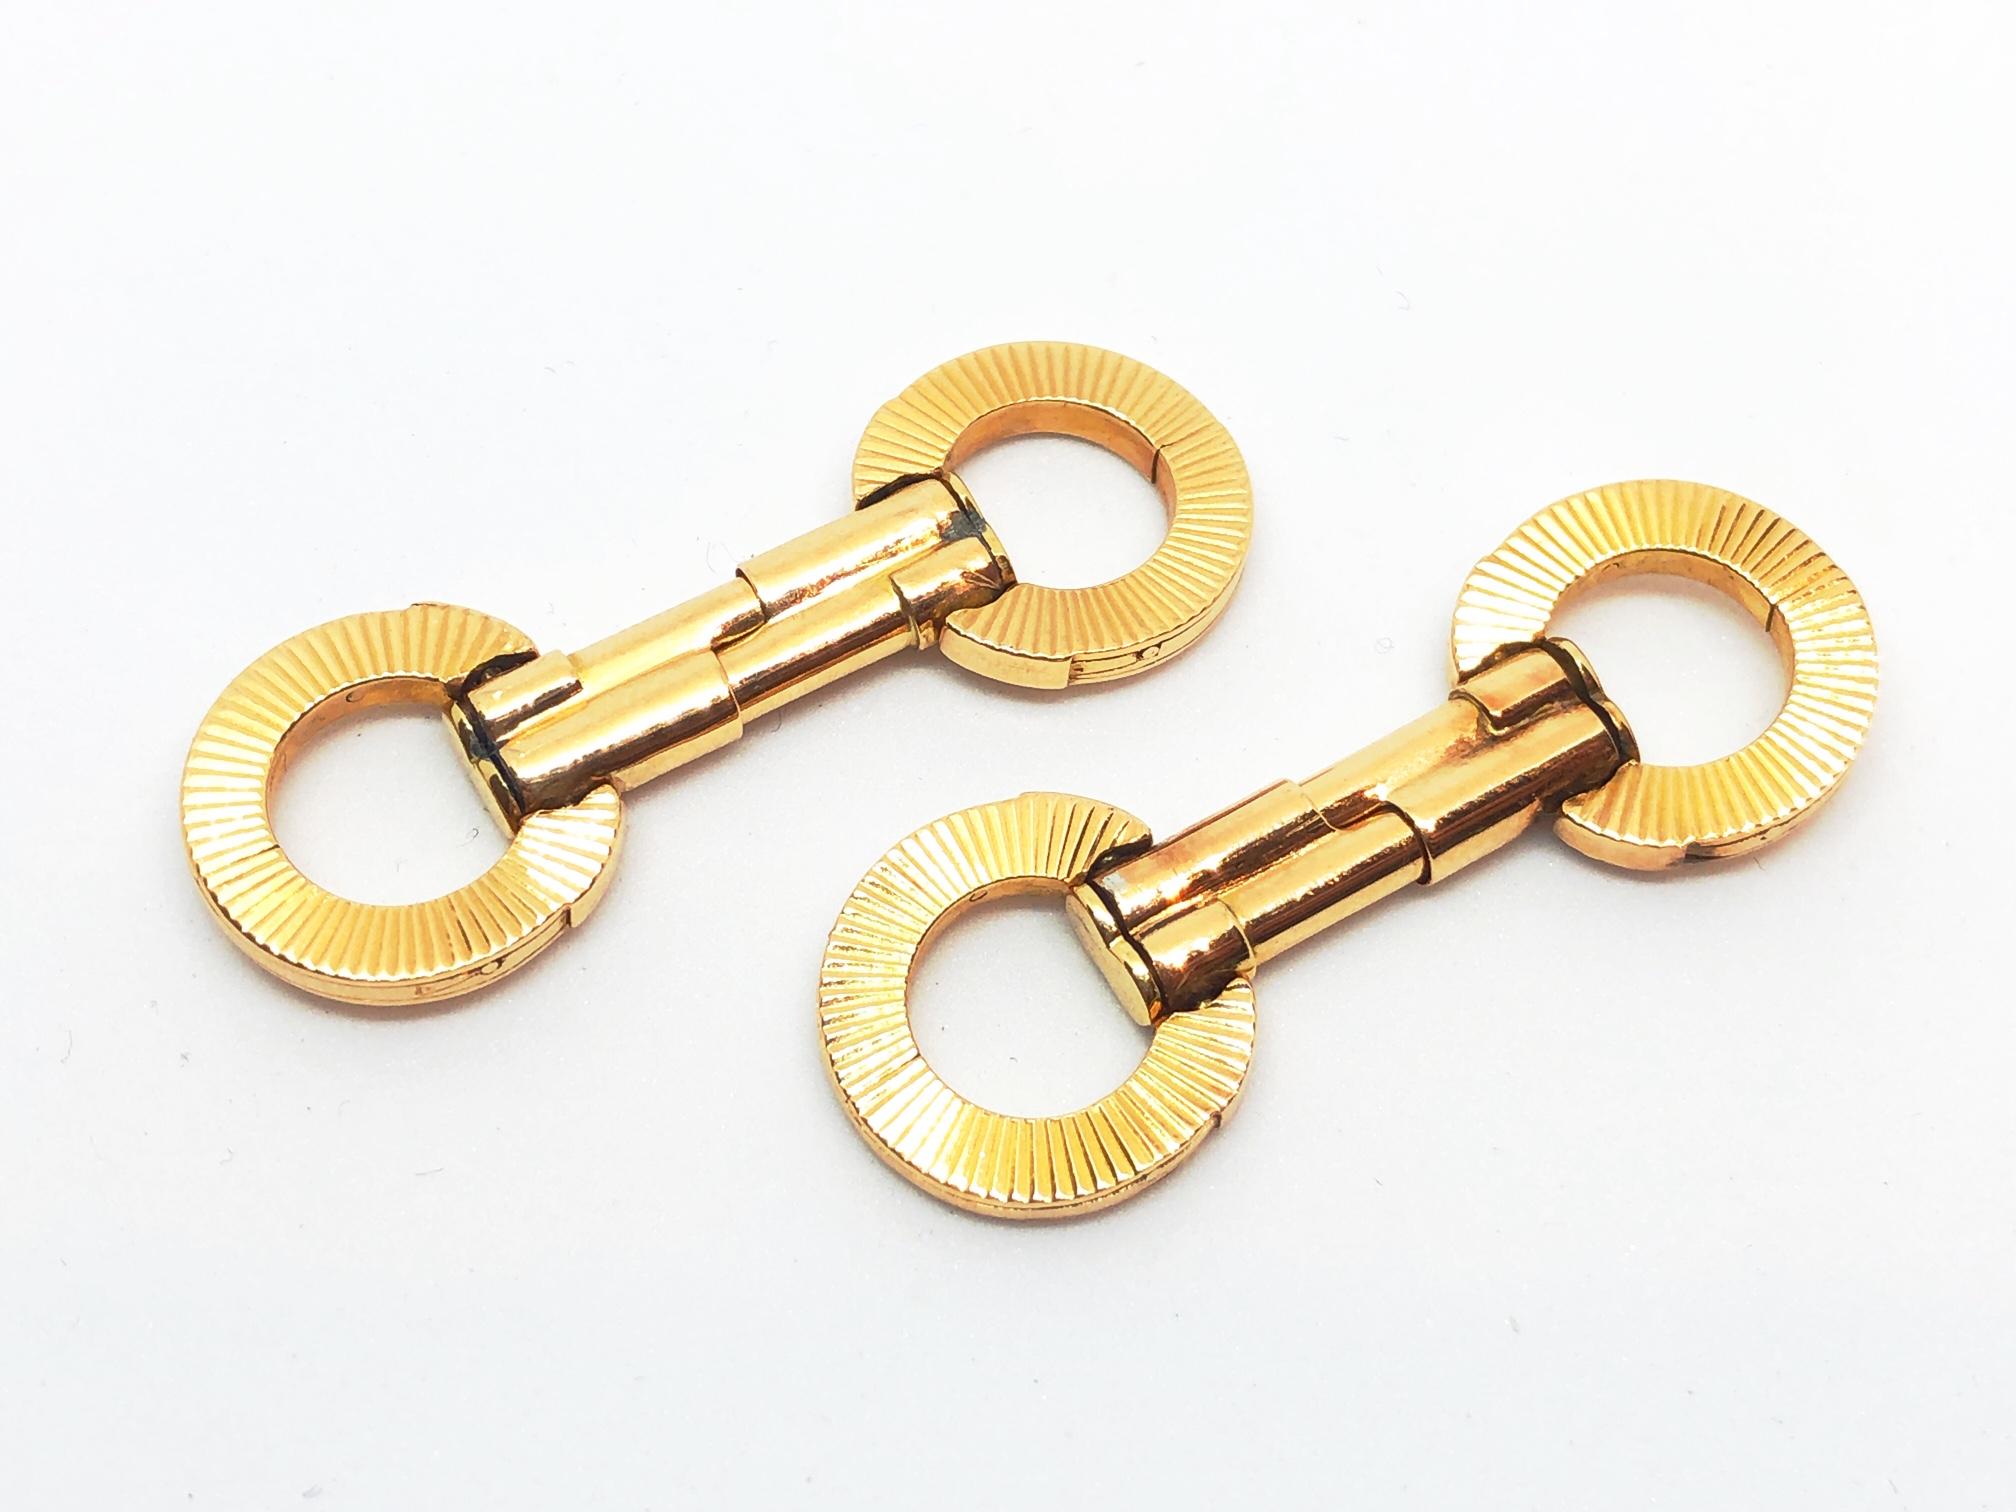 A pair of French engraved gold cufflinks, with folding, circle stirrup style ends, with radiating reeded engraving, with sprung double bar fittings, with French eagle head marks for 18ct gold, circa 1950.
Length approximately 43mm, when unfolded, 14